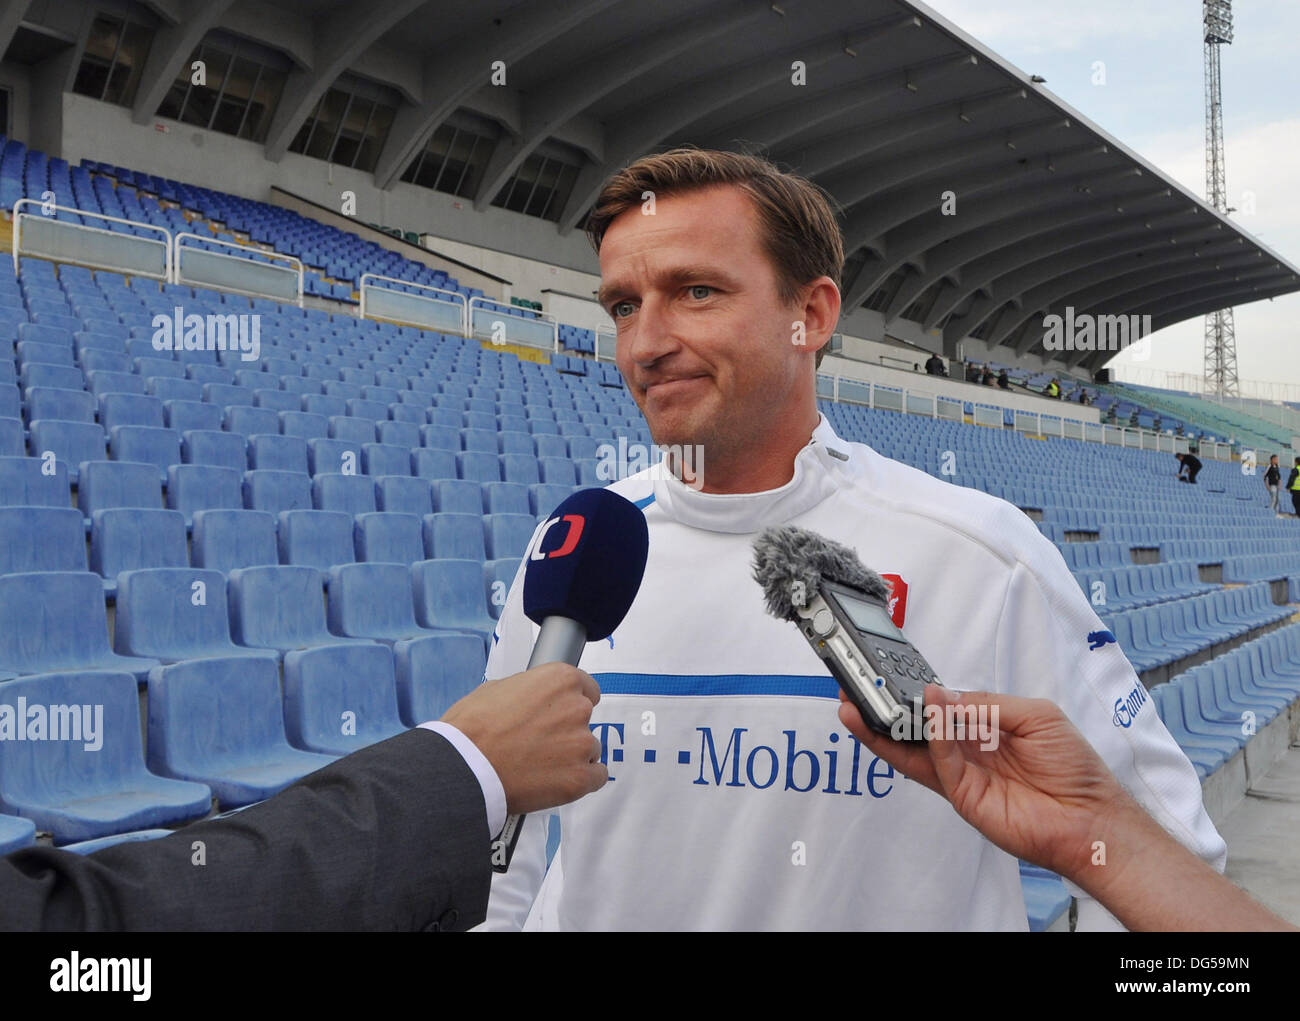 Sofia, Bulgaria. 14th Oct, 2013. Manager of the Czech national soccer team Vladimir Smicer speaks to media during a training prior to the match against Bulgaria in Sofia, Bulgaria, October 14, 2013. Smicer ends as manager because Football Association won´t extend his contract which expires at the end of the year. © David Svab/CTK Photo/Alamy Live News Stock Photo